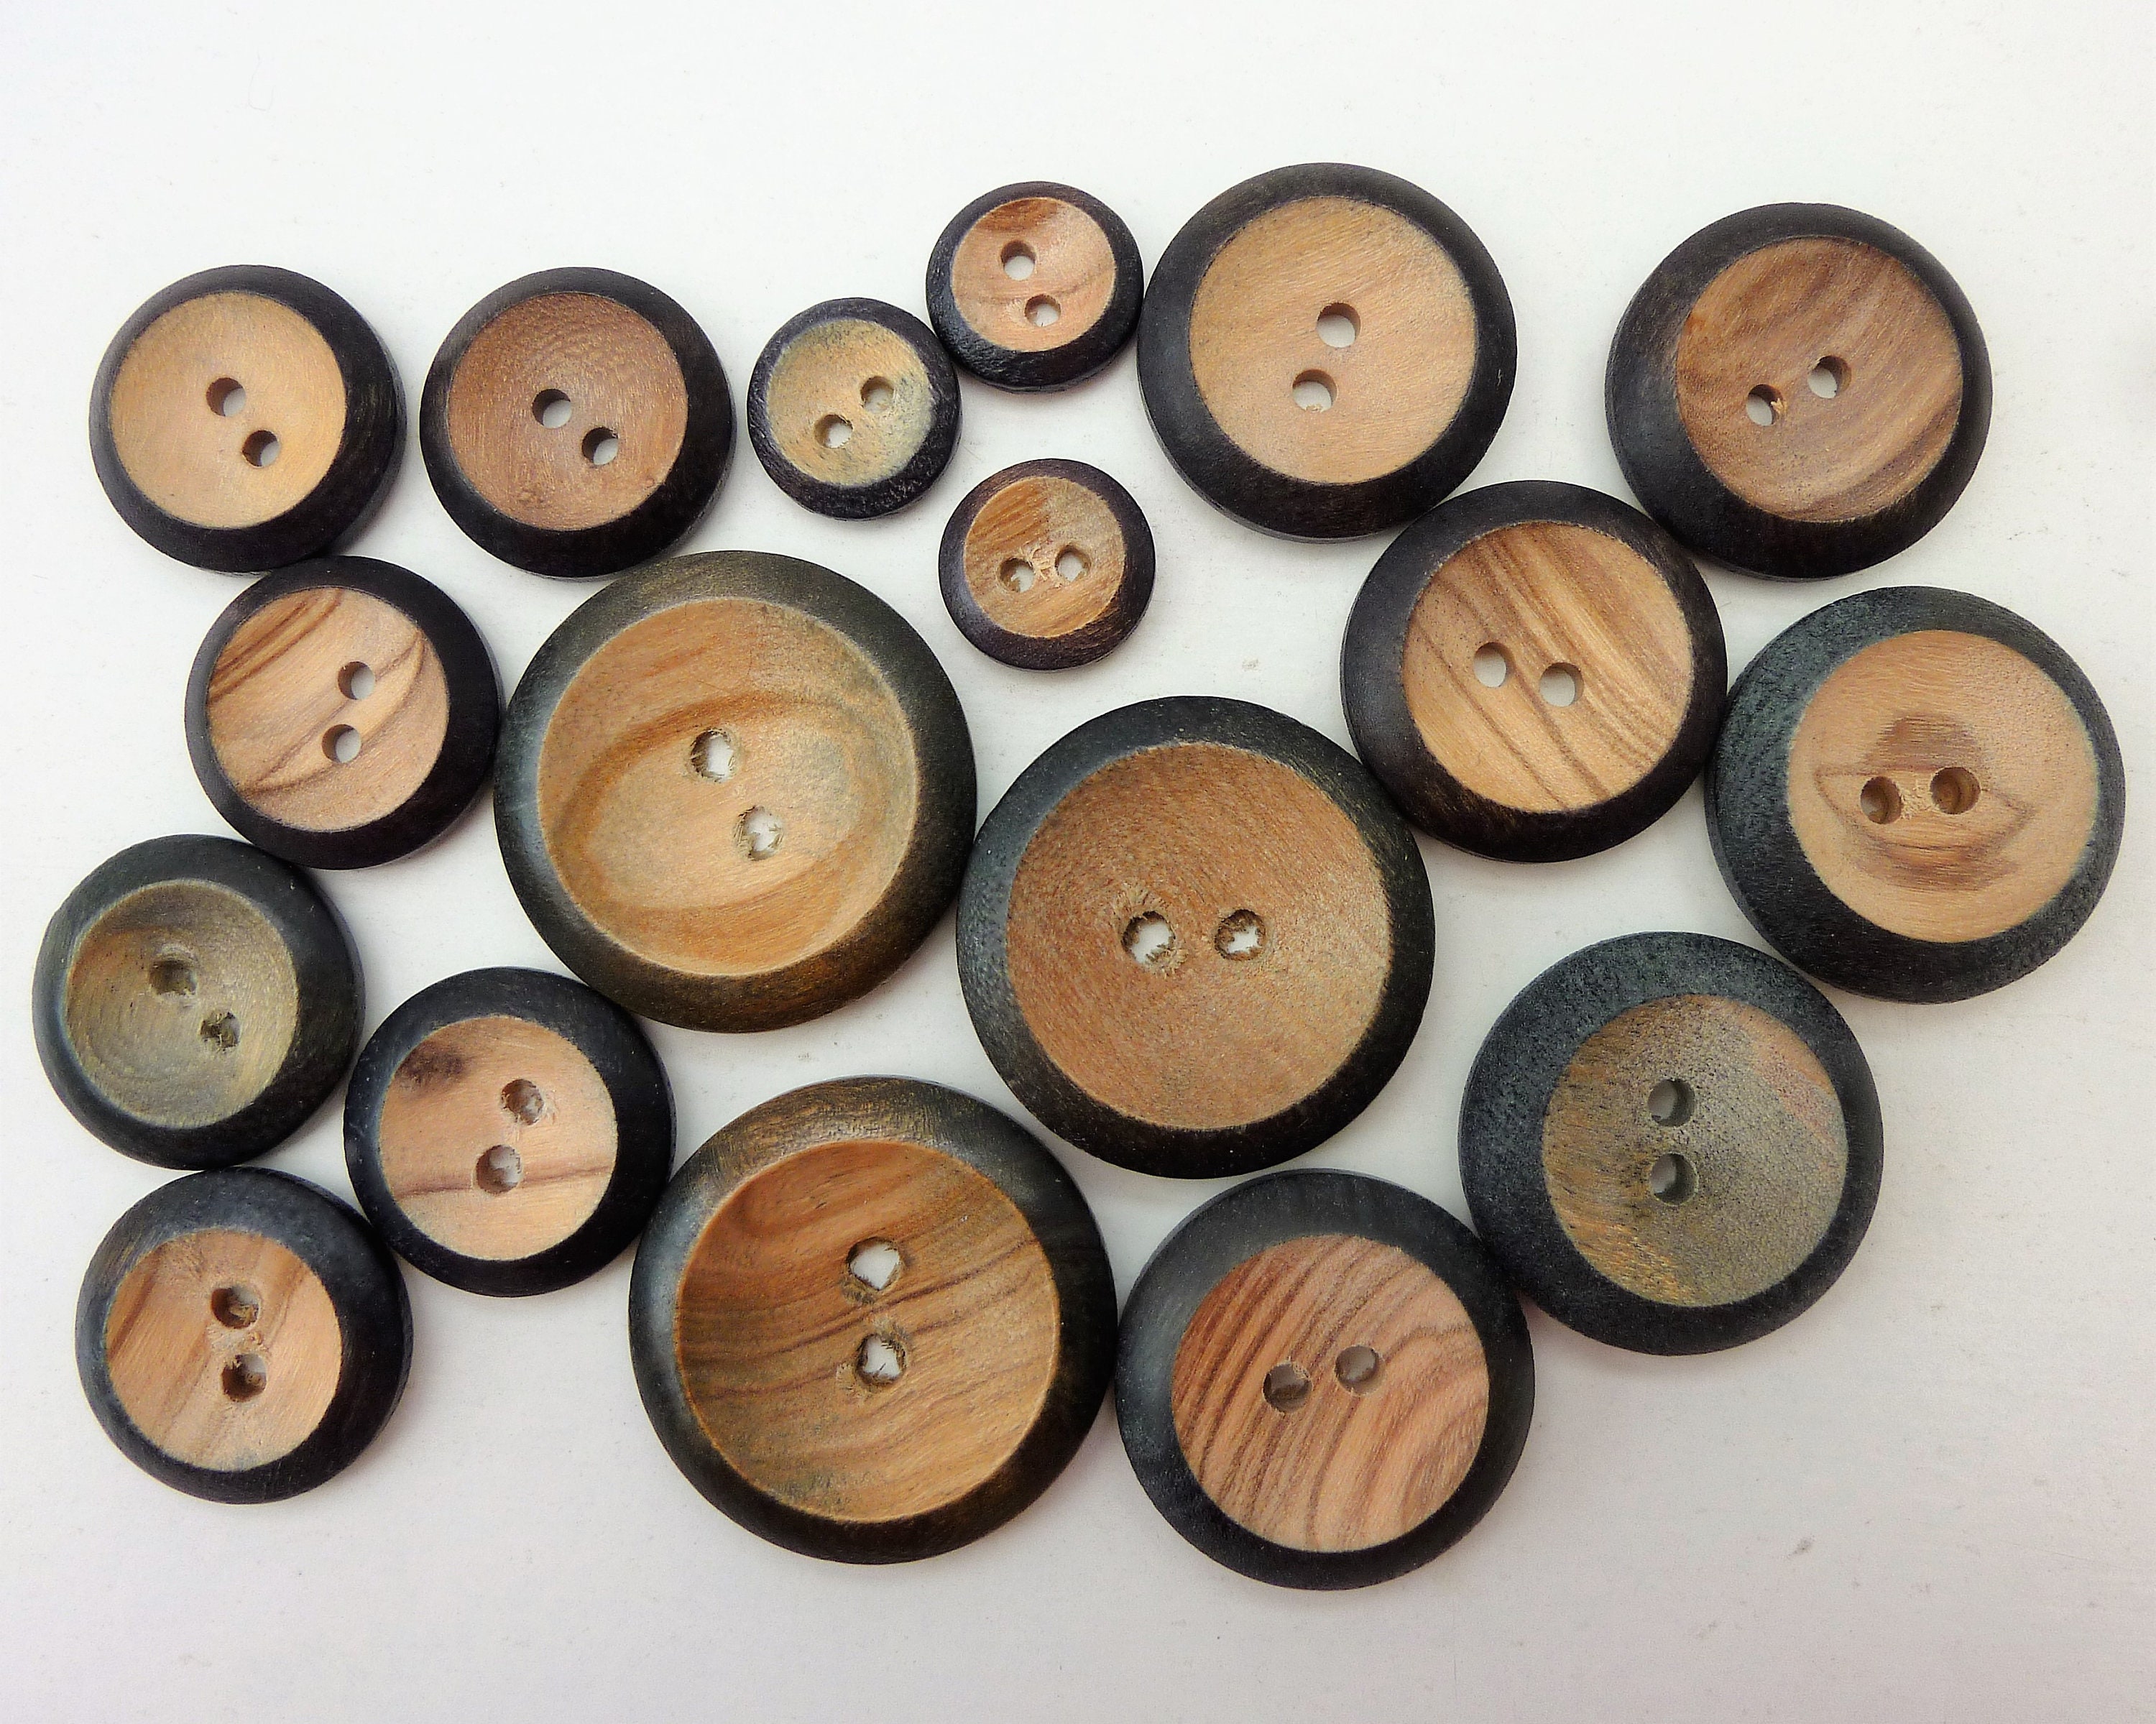 10-50PCS Multi Sizes Round Buttons Mixed 2-Holes Wooden Buttons For Crafts  Clothing Scrapbooking DIY Sewing Accessories